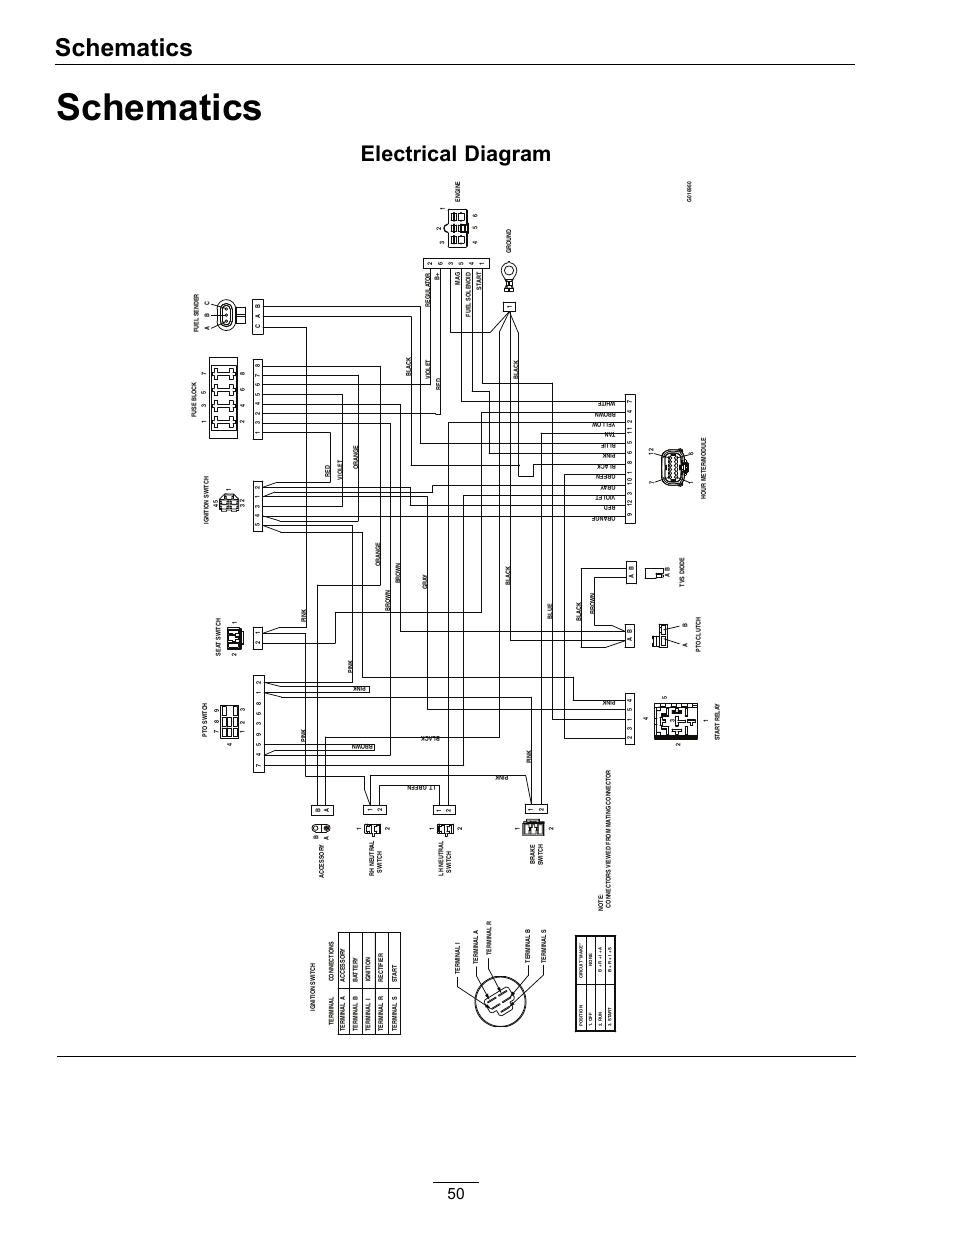 wiring diagram goodman air conditioners